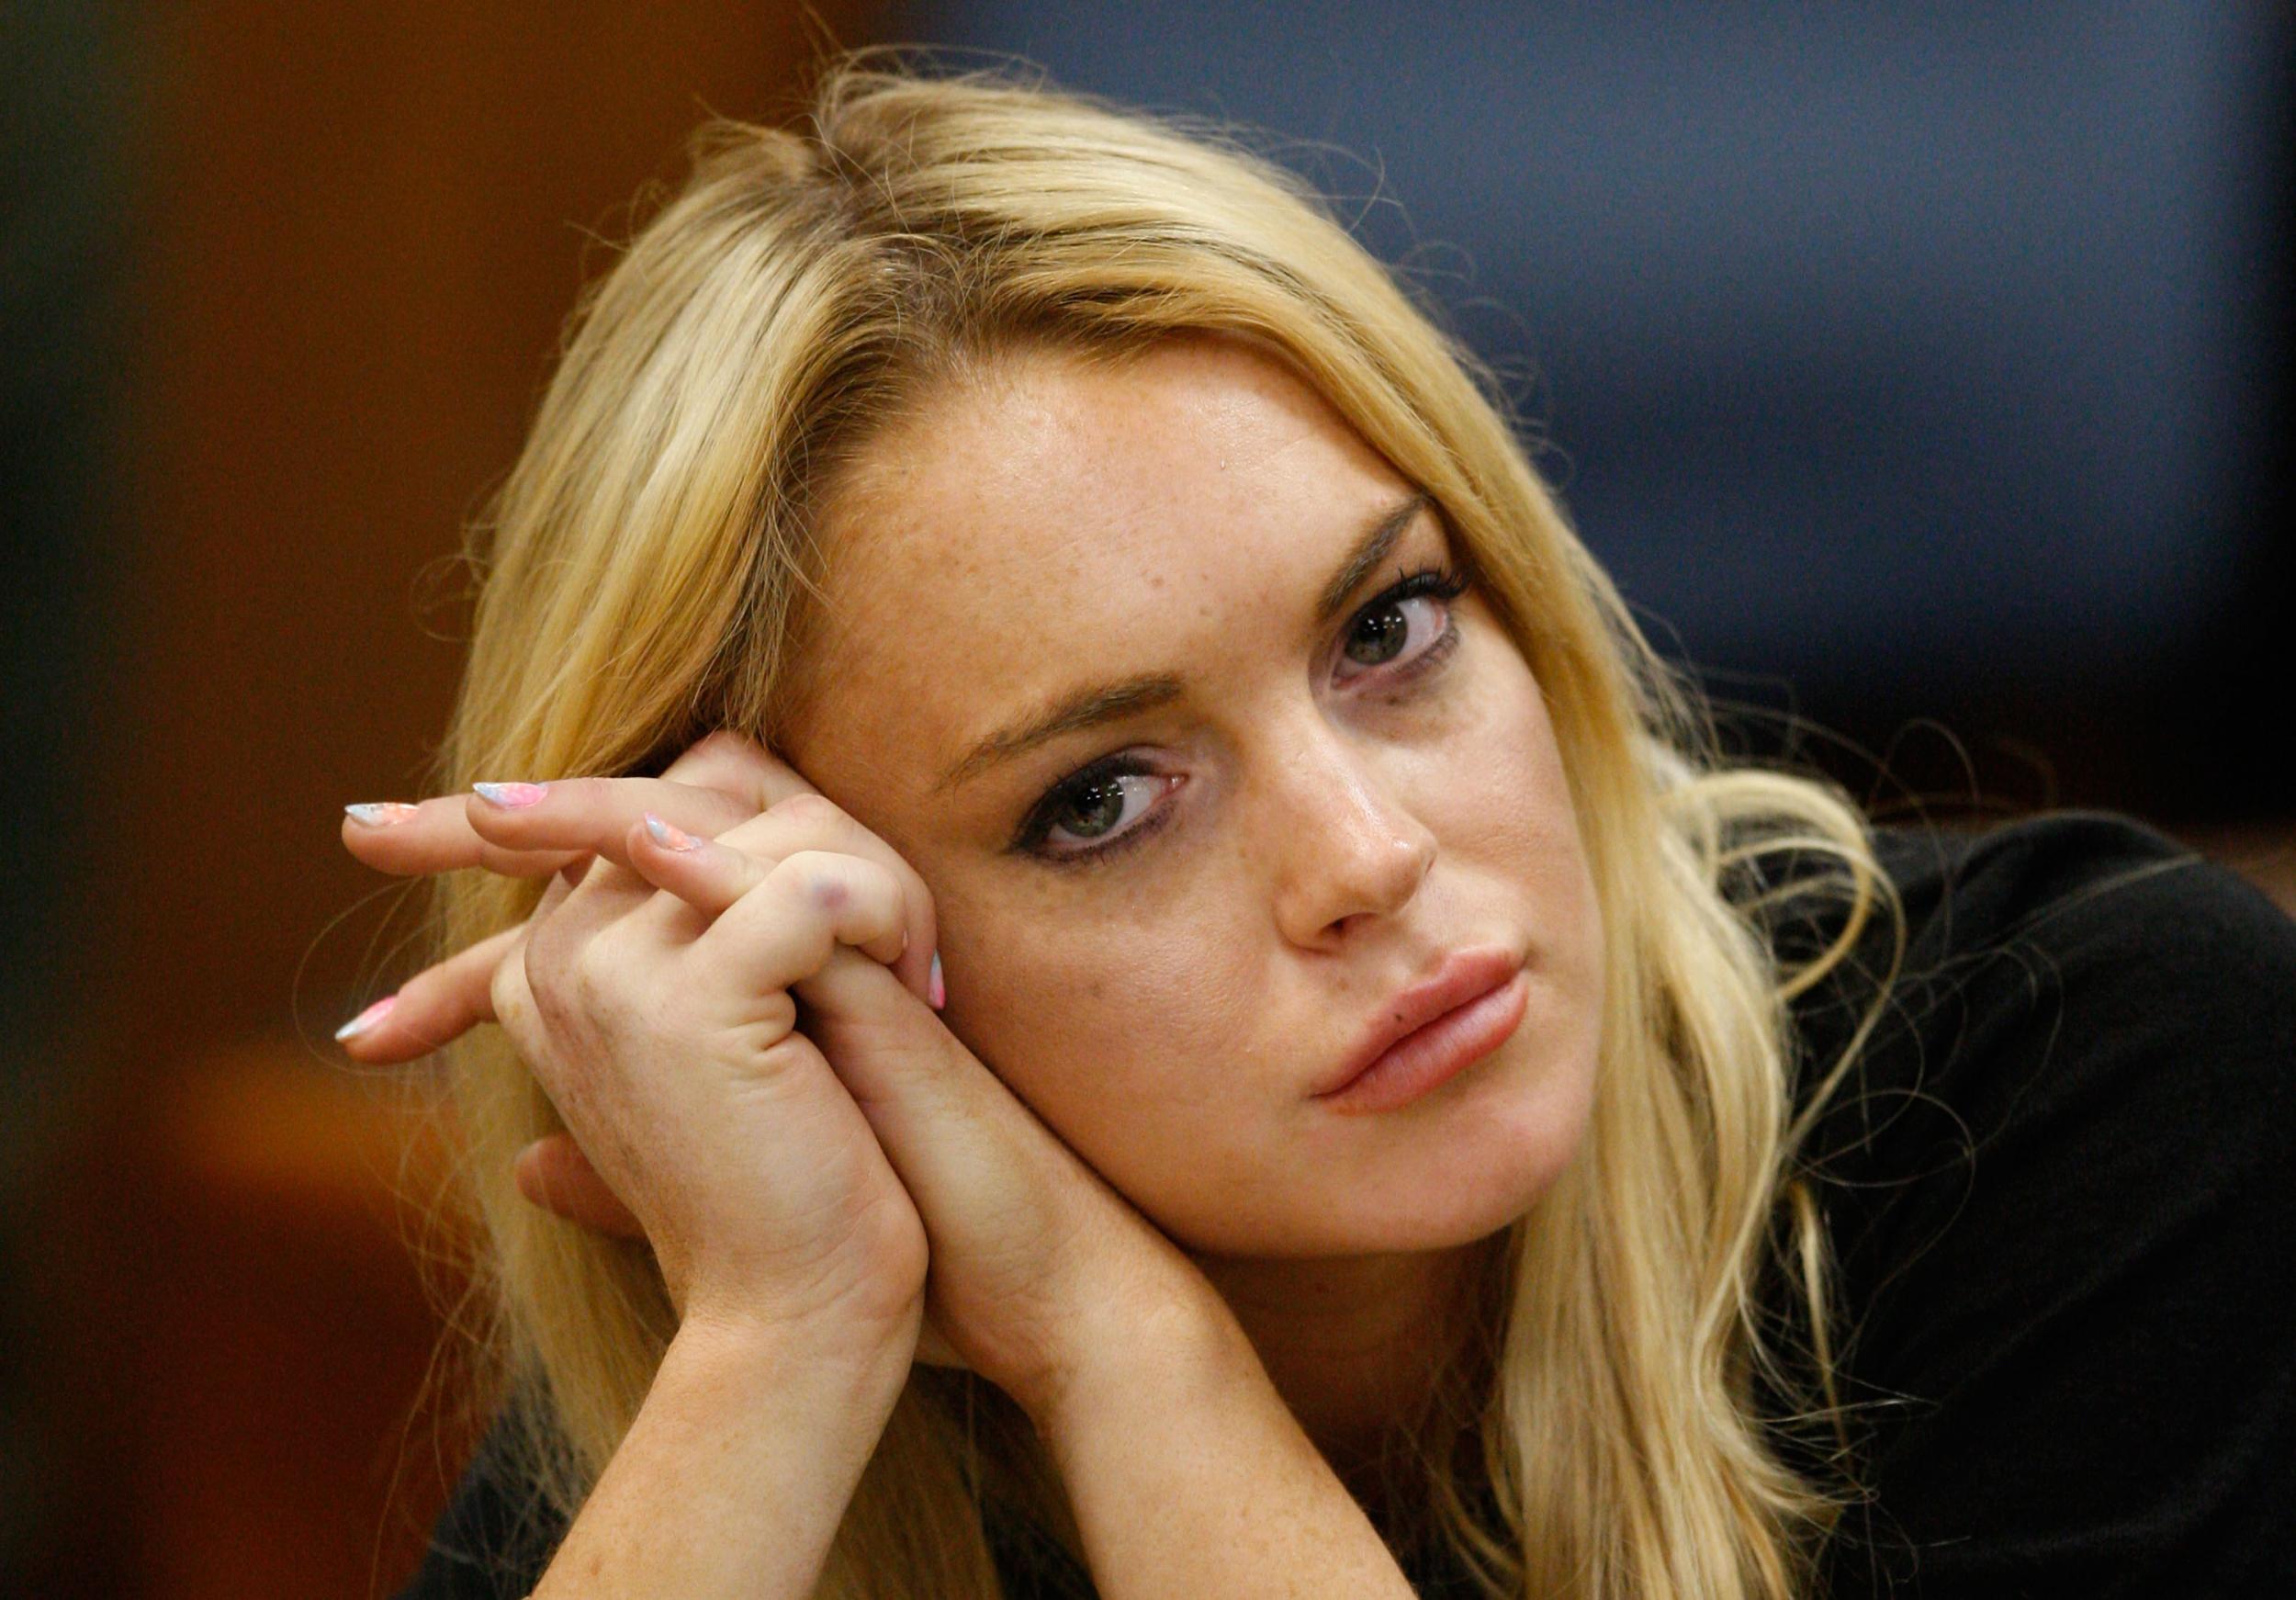 With the appeal lost Ms Lohan will now have to meet the company's legal costs